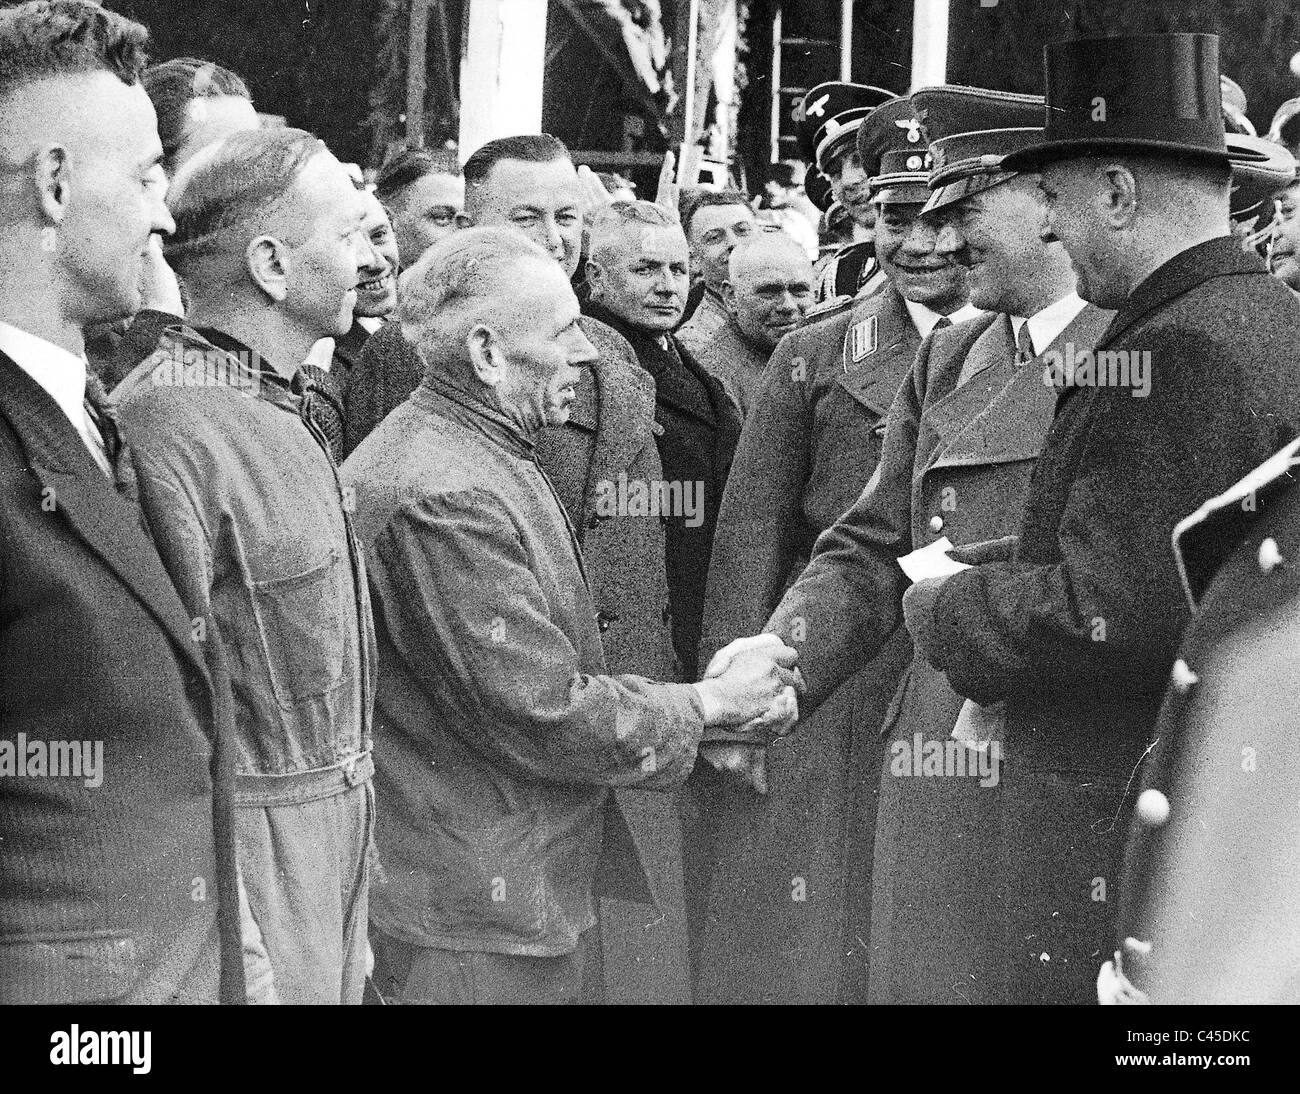 Hitler with workers in Hamburg Stock Photo - Alamy